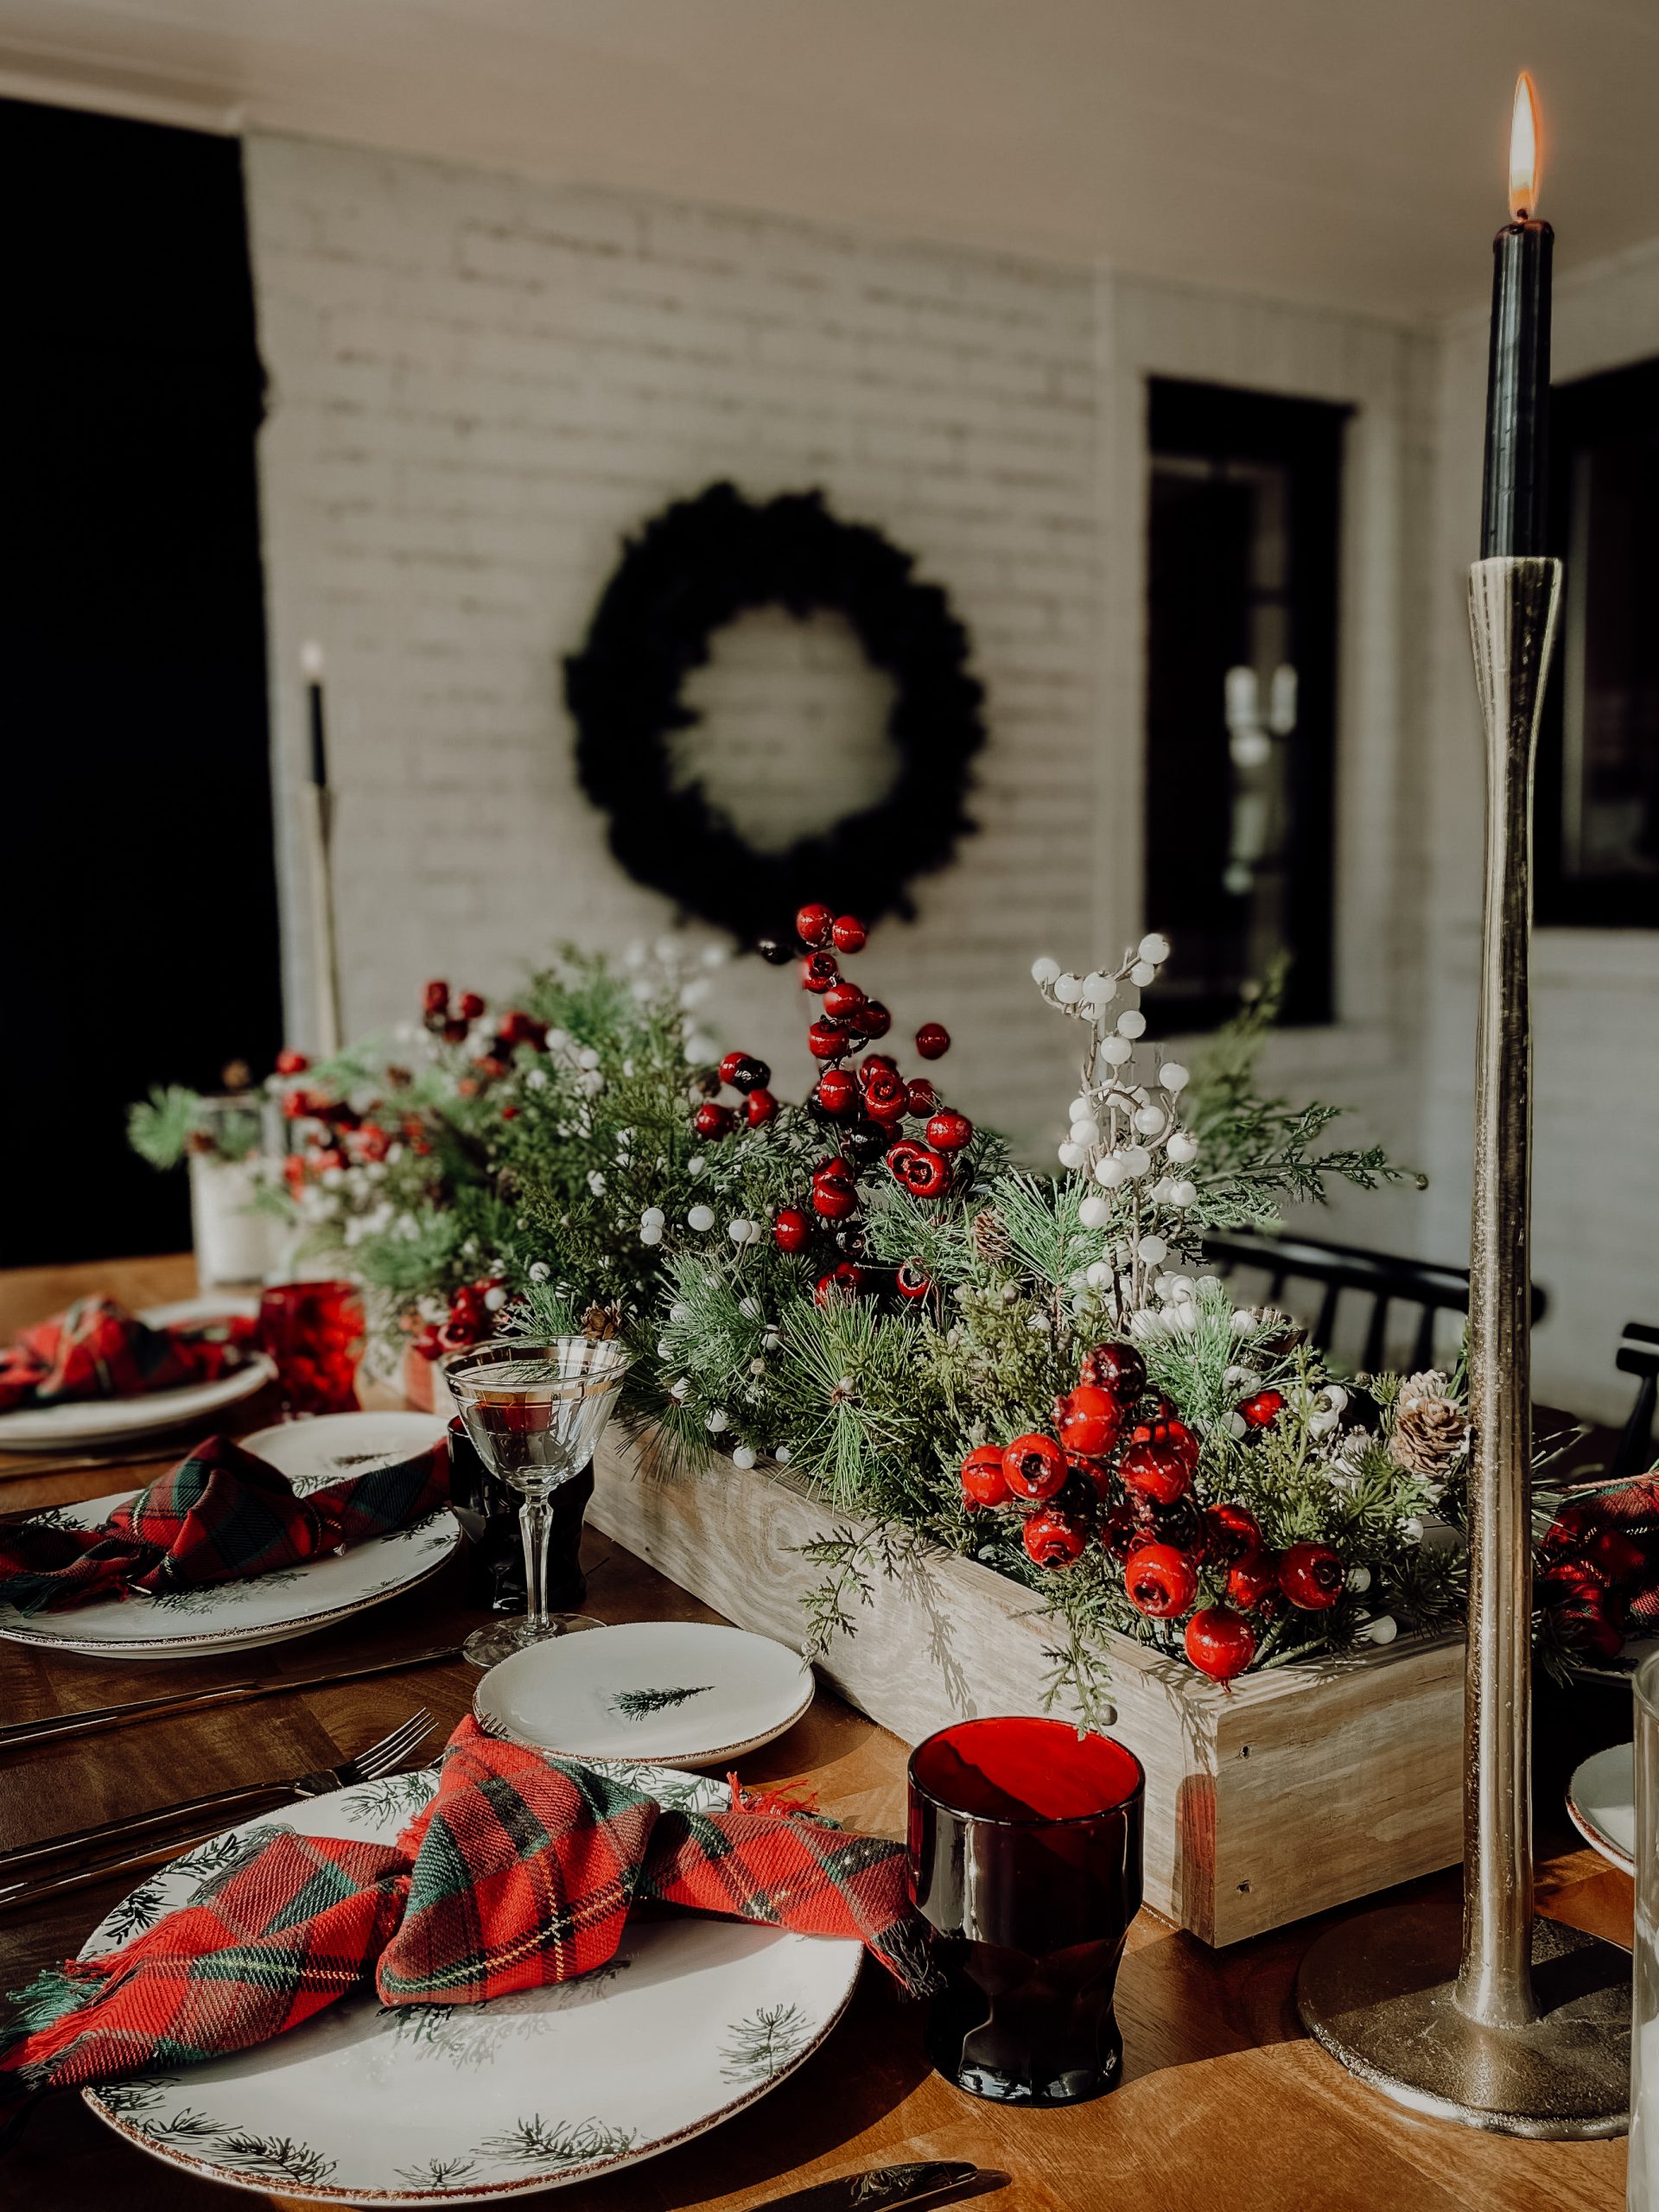 A traditional Christmas dining room with a modern twist featuring Tartan Plaid, pops of black and pine tree accents. 

See more on
www.mirandaschroeder.com